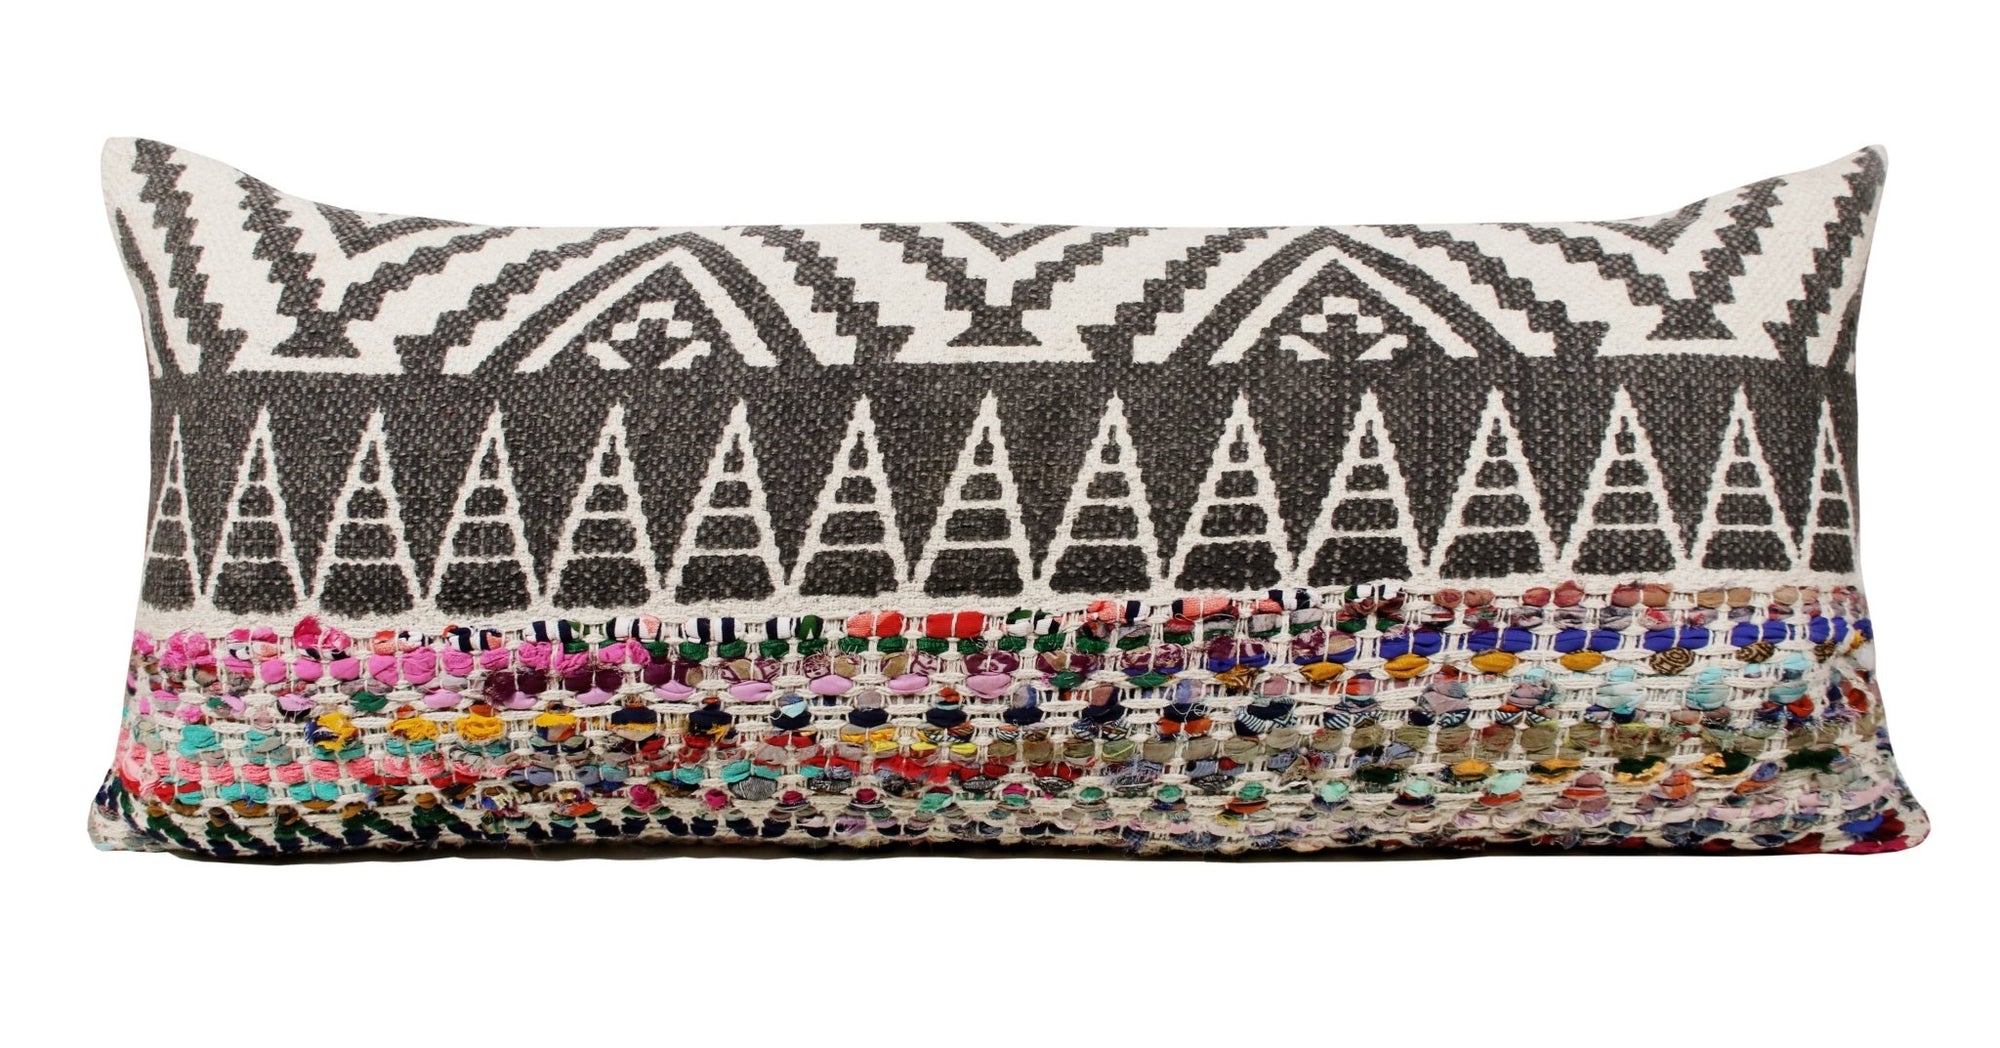 Chindi Lr07350 Multicolored Pillow - Rug & Home